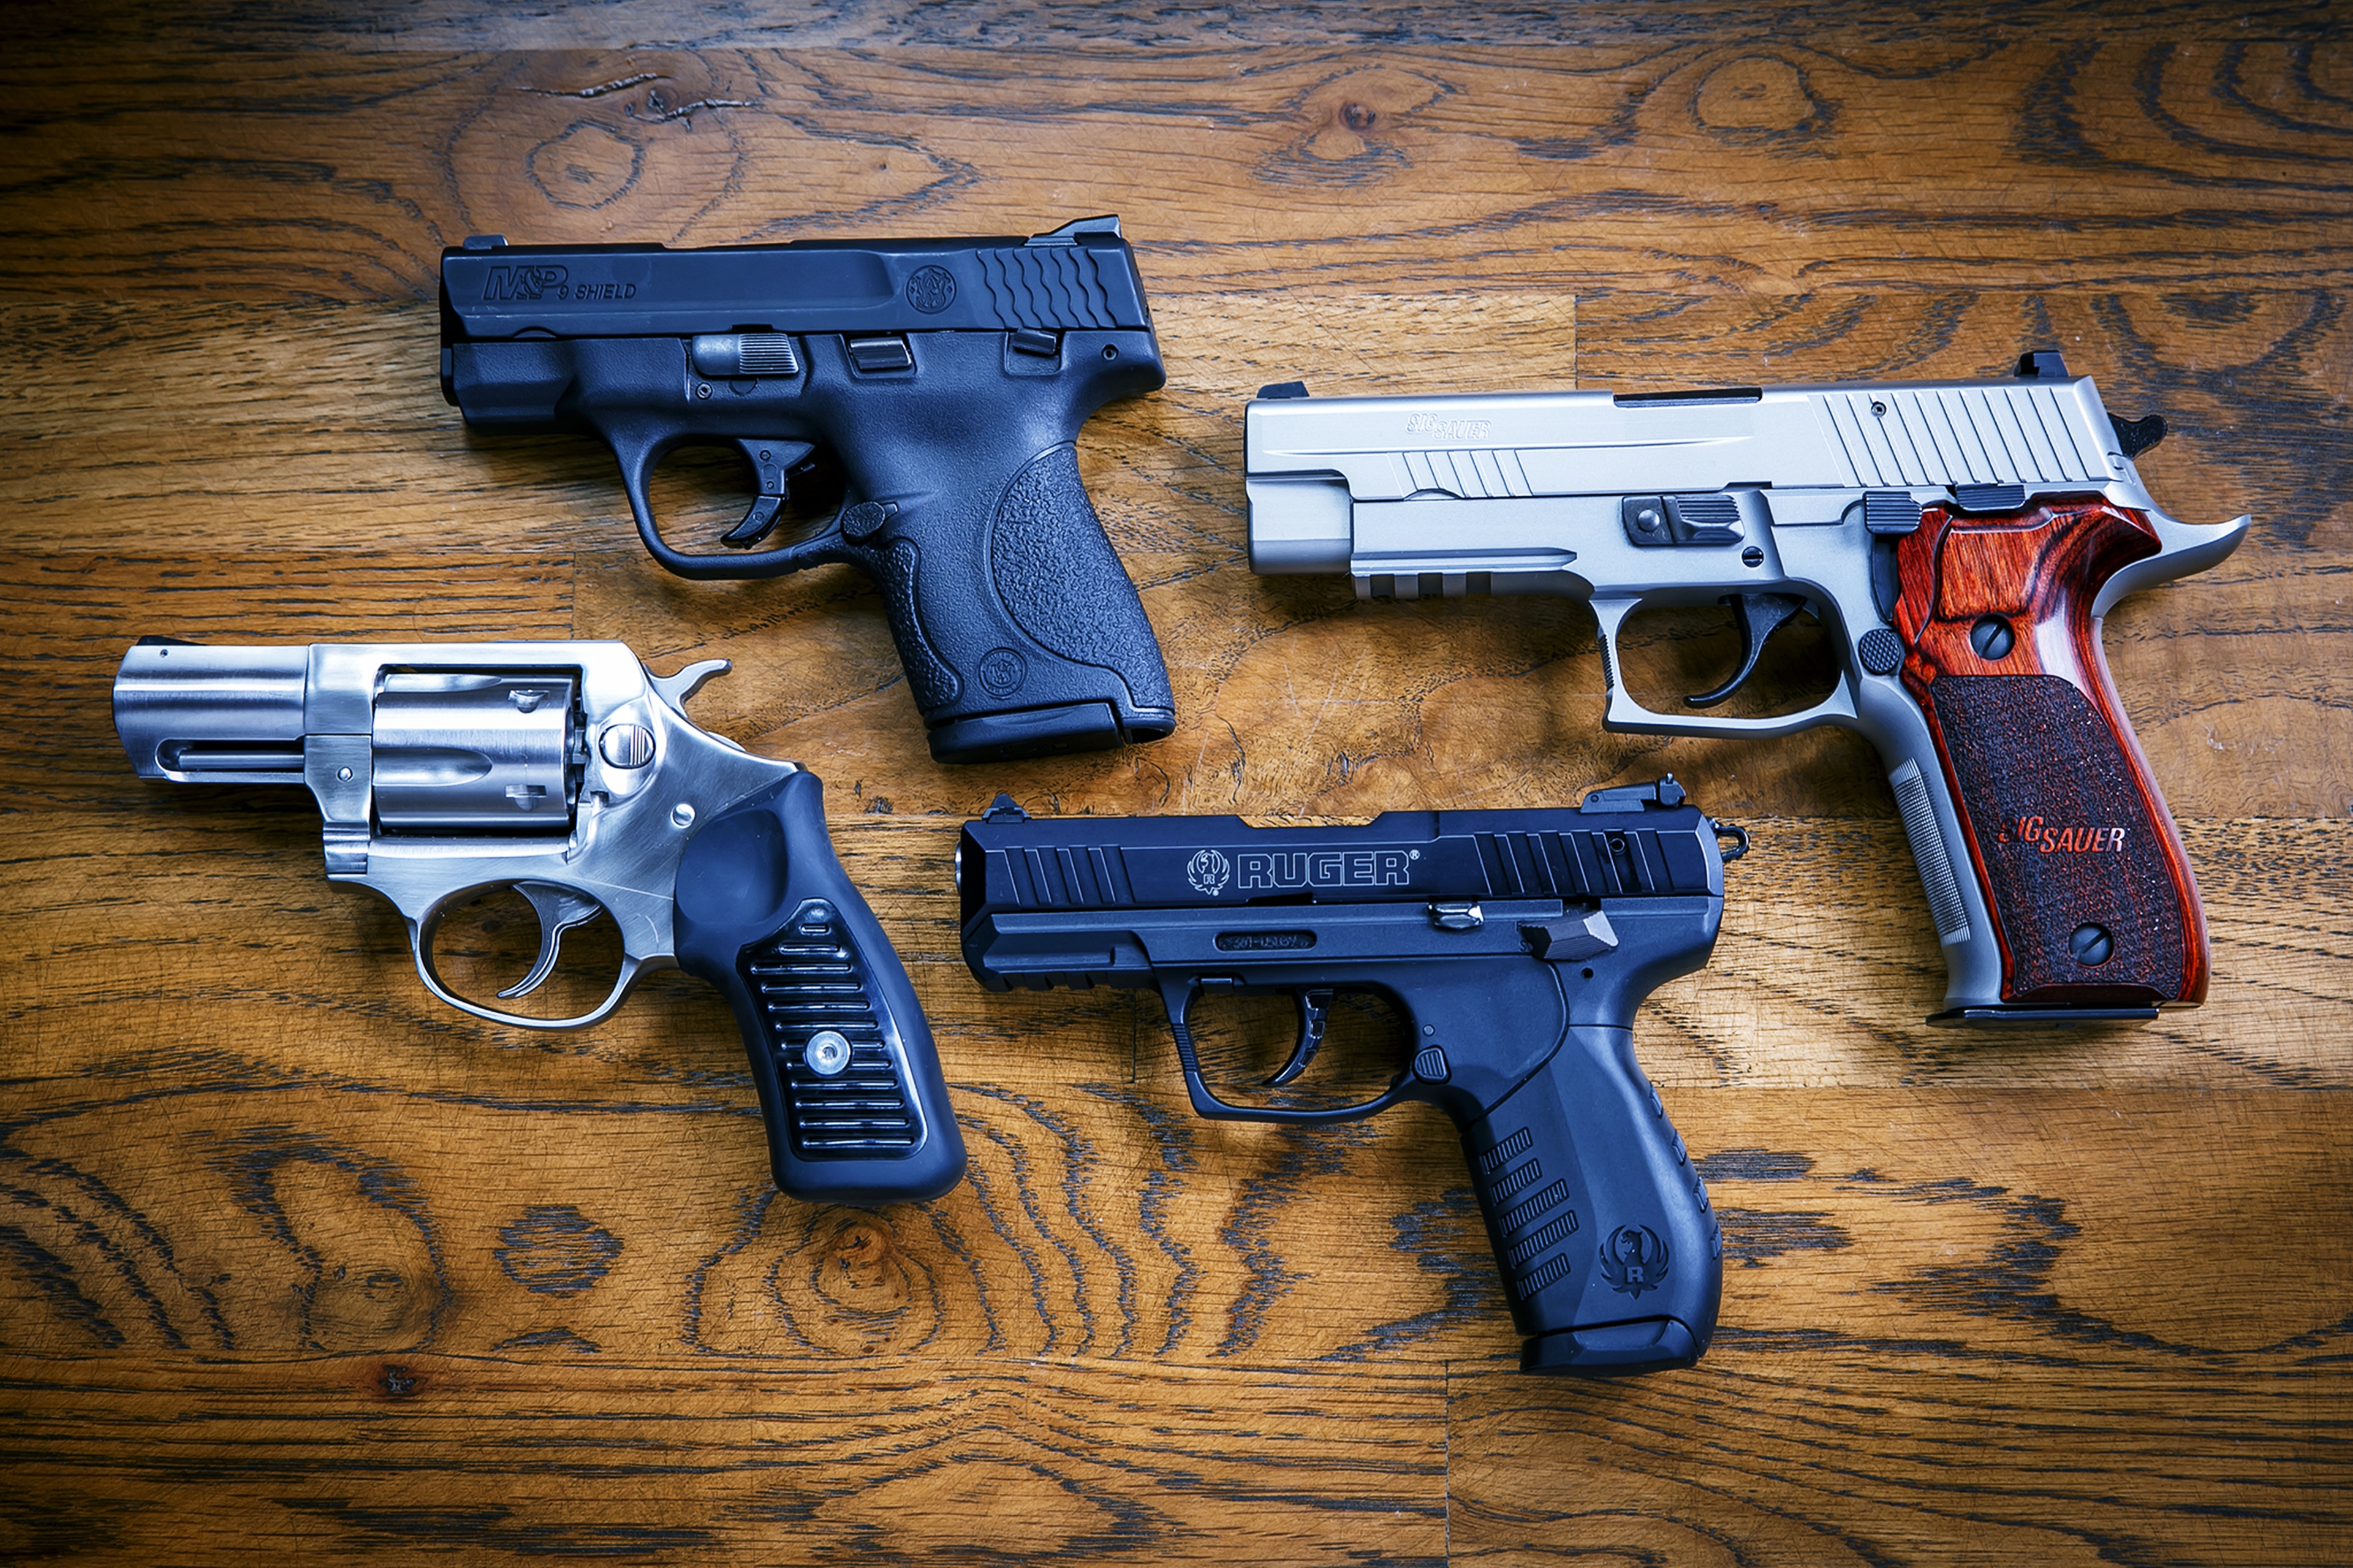 police, pistol, weapons, ruger, smith & wesson UHD